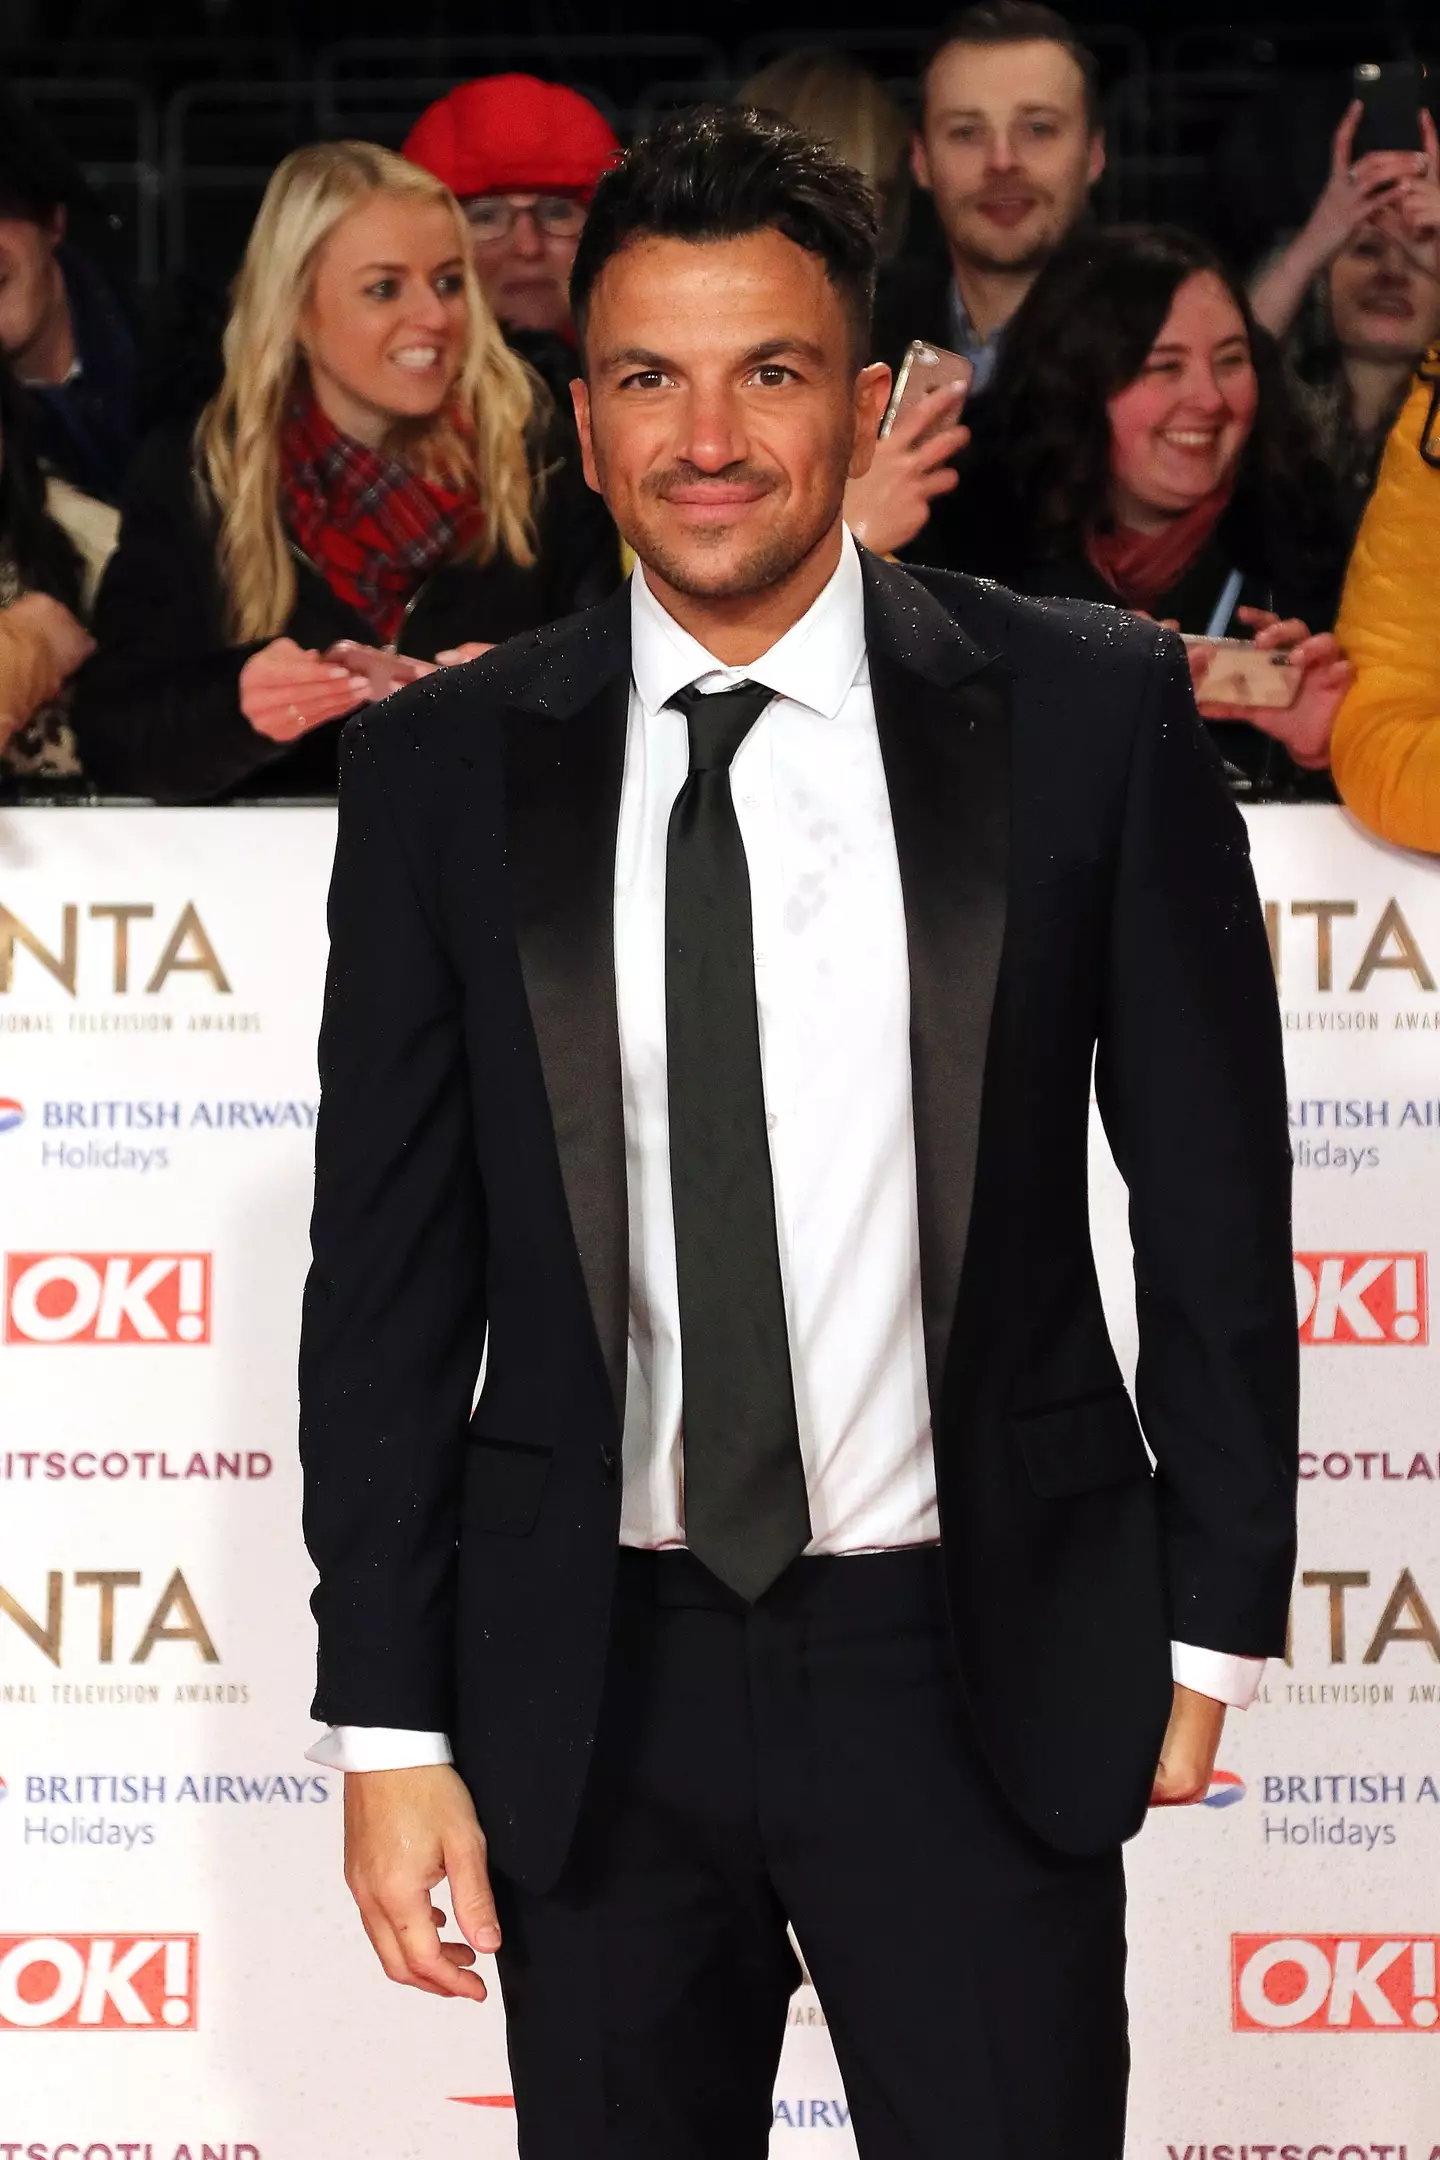 Peter Andre has opened up about the 'psychological fallout' he still experiences following a topless paparazzi photo.